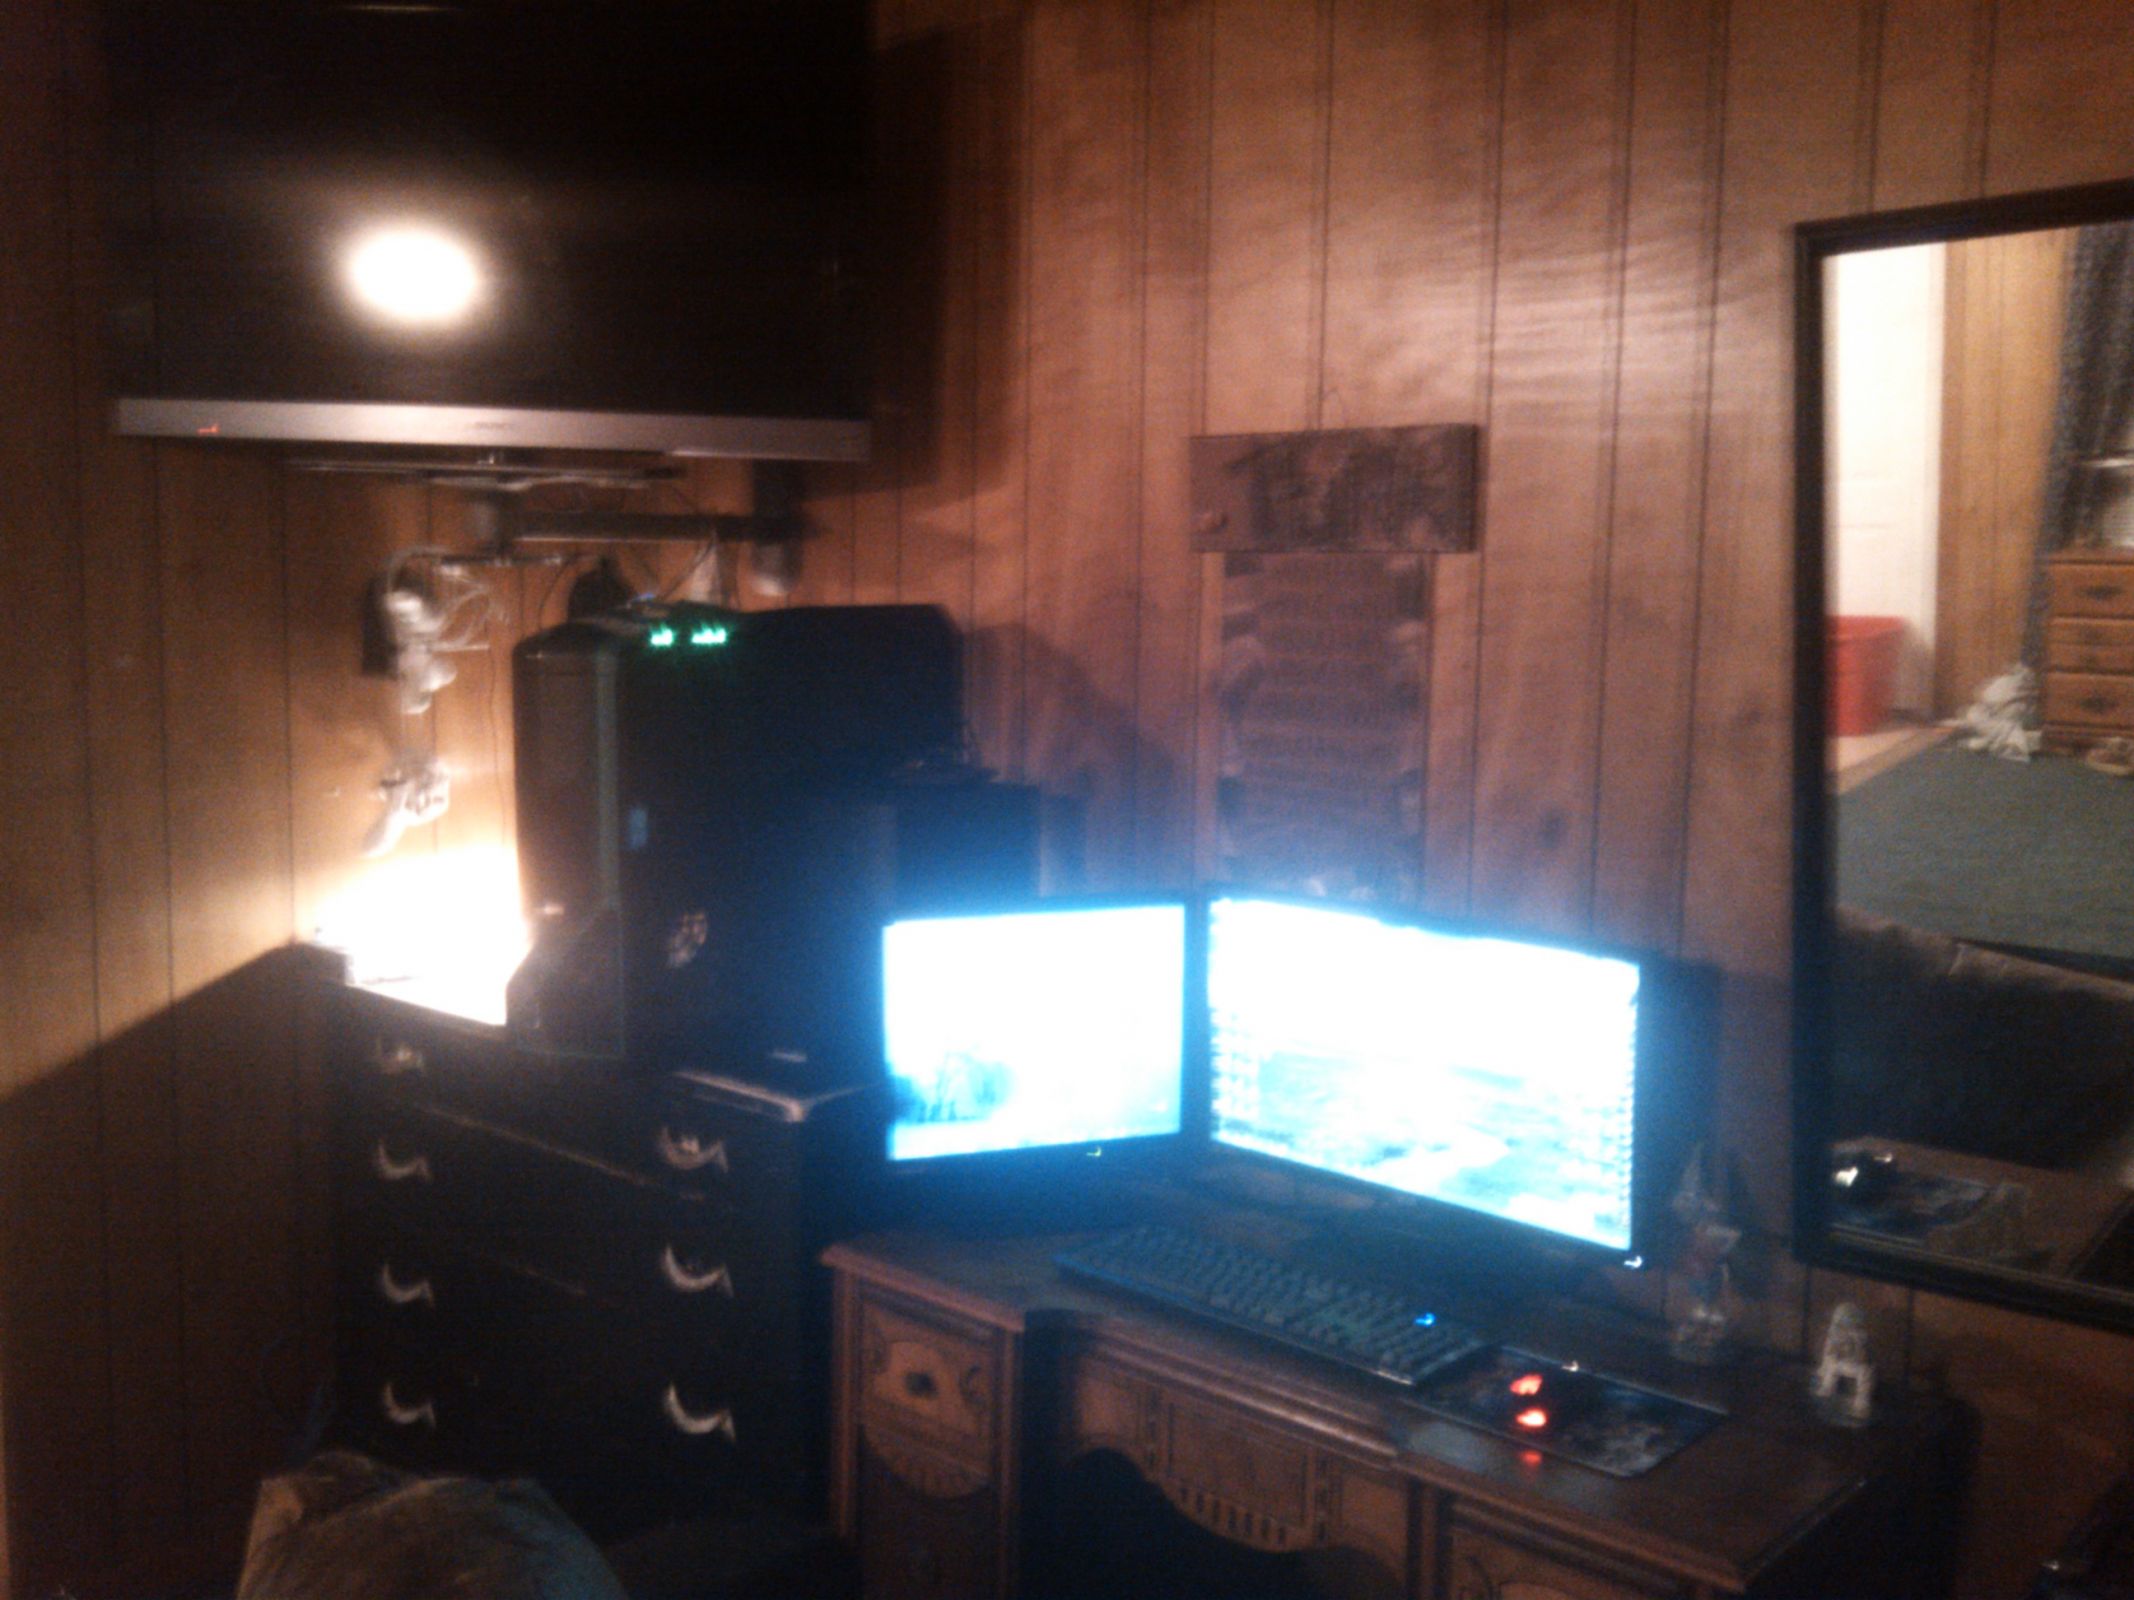 Dual TV gaming and television space.